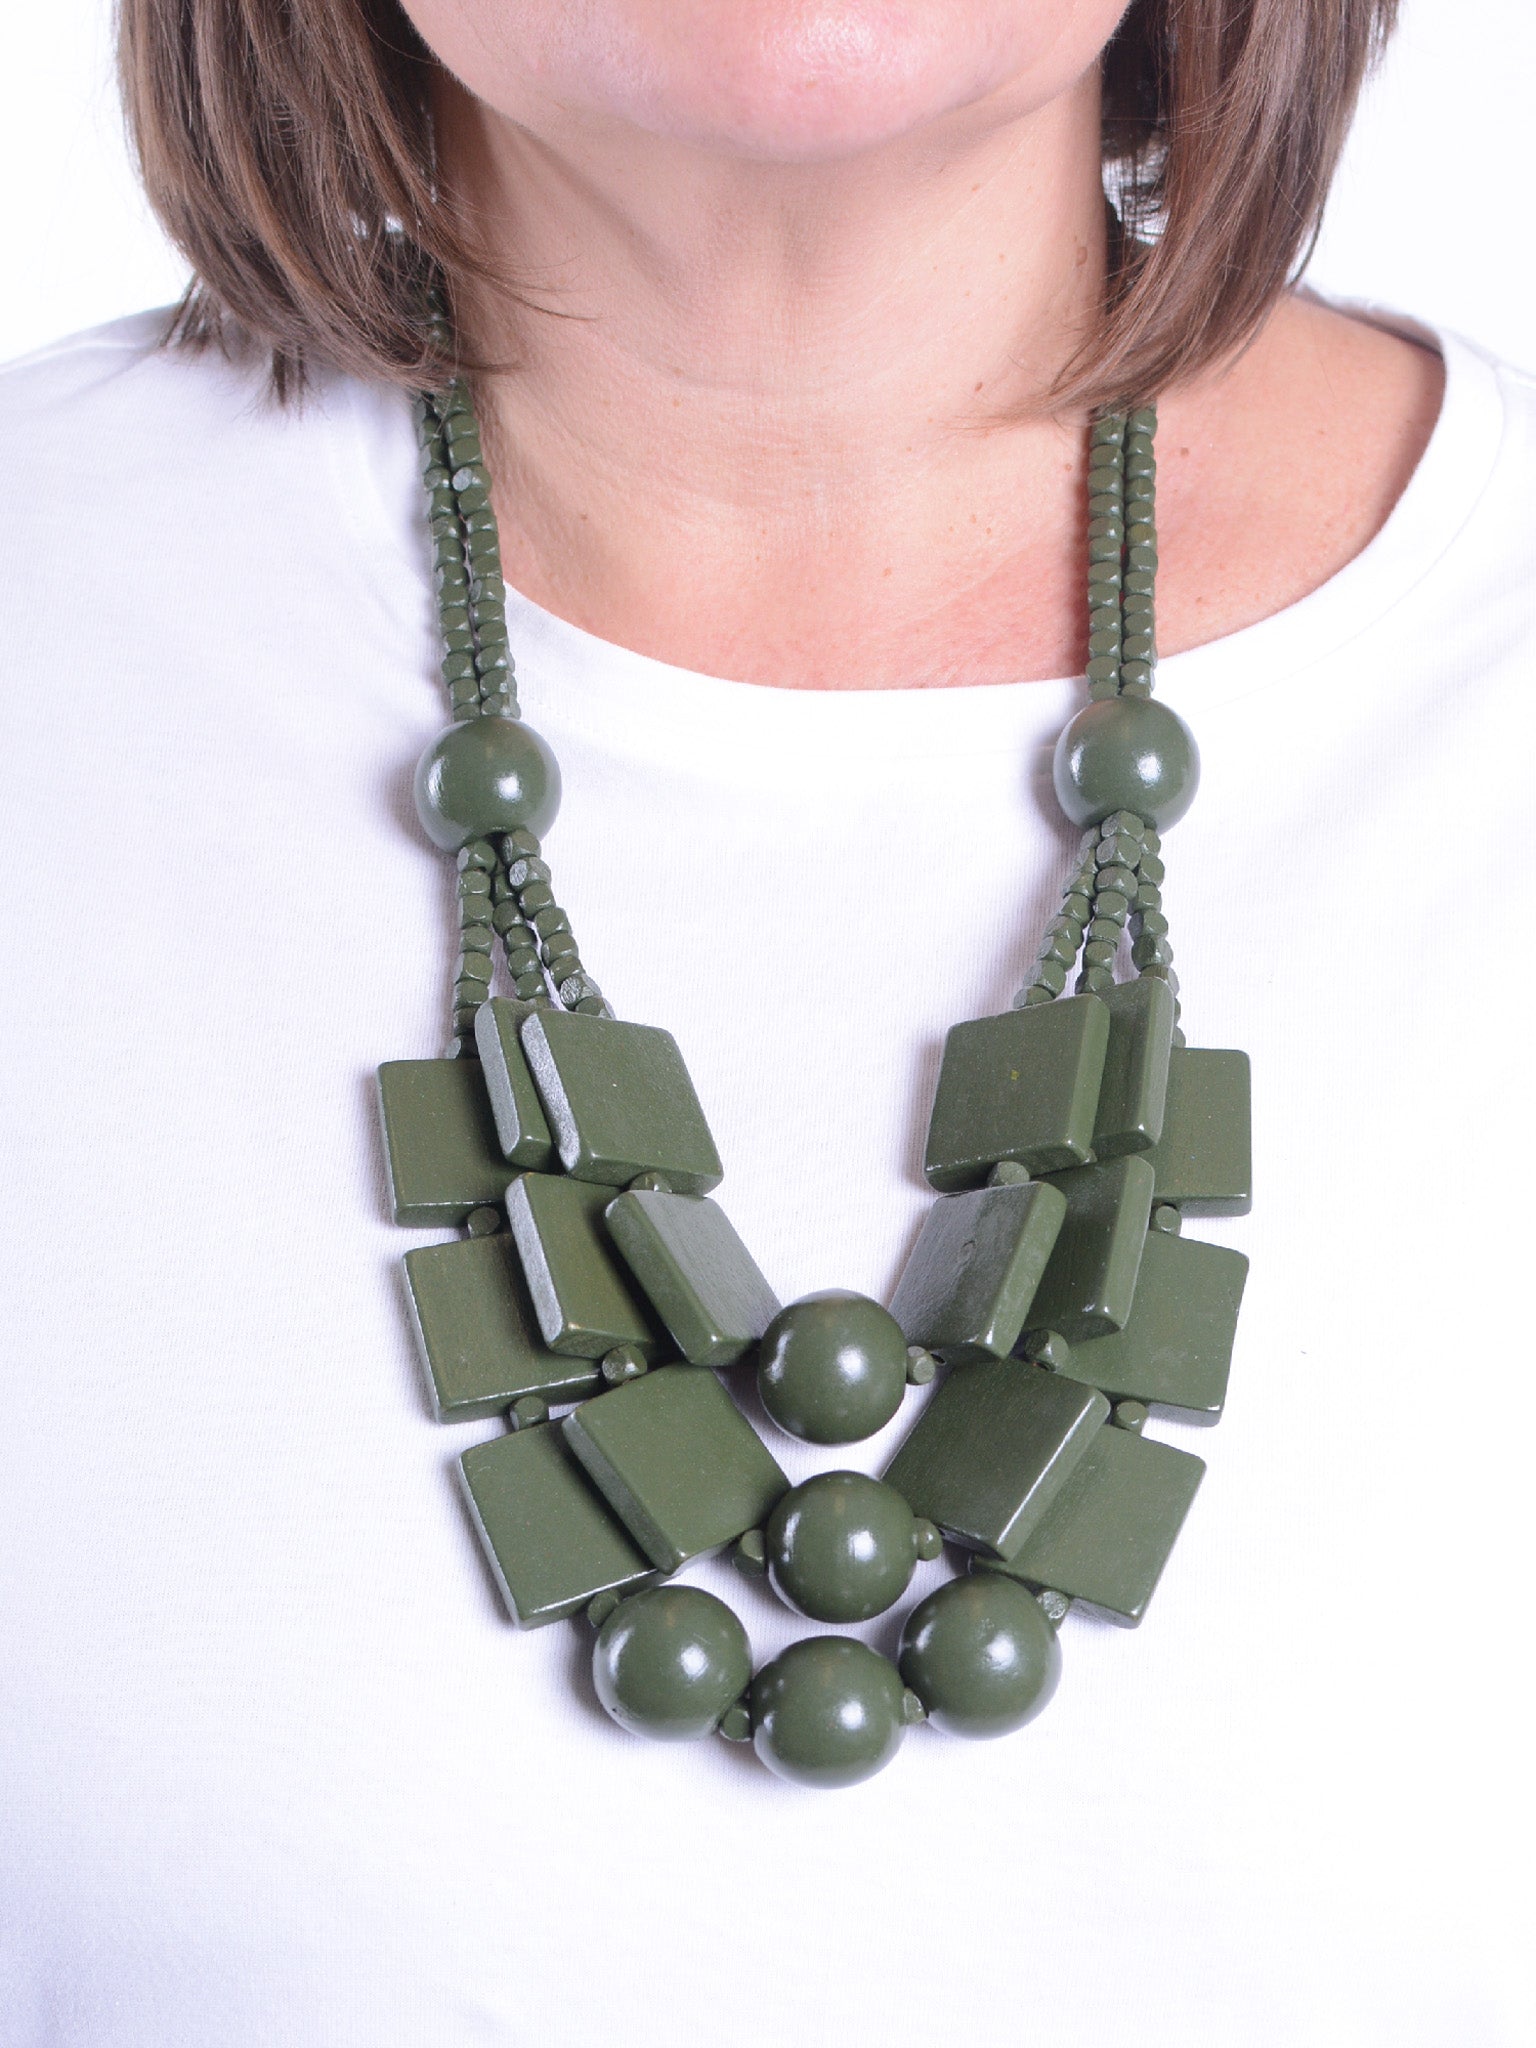 Lagenlook Necklace Khaki, Army Green  - LAGEN09, Necklaces & Pendants, Pure Plus Clothing, Lagenlook Clothing, Plus Size Fashion, Over 50 Fashion